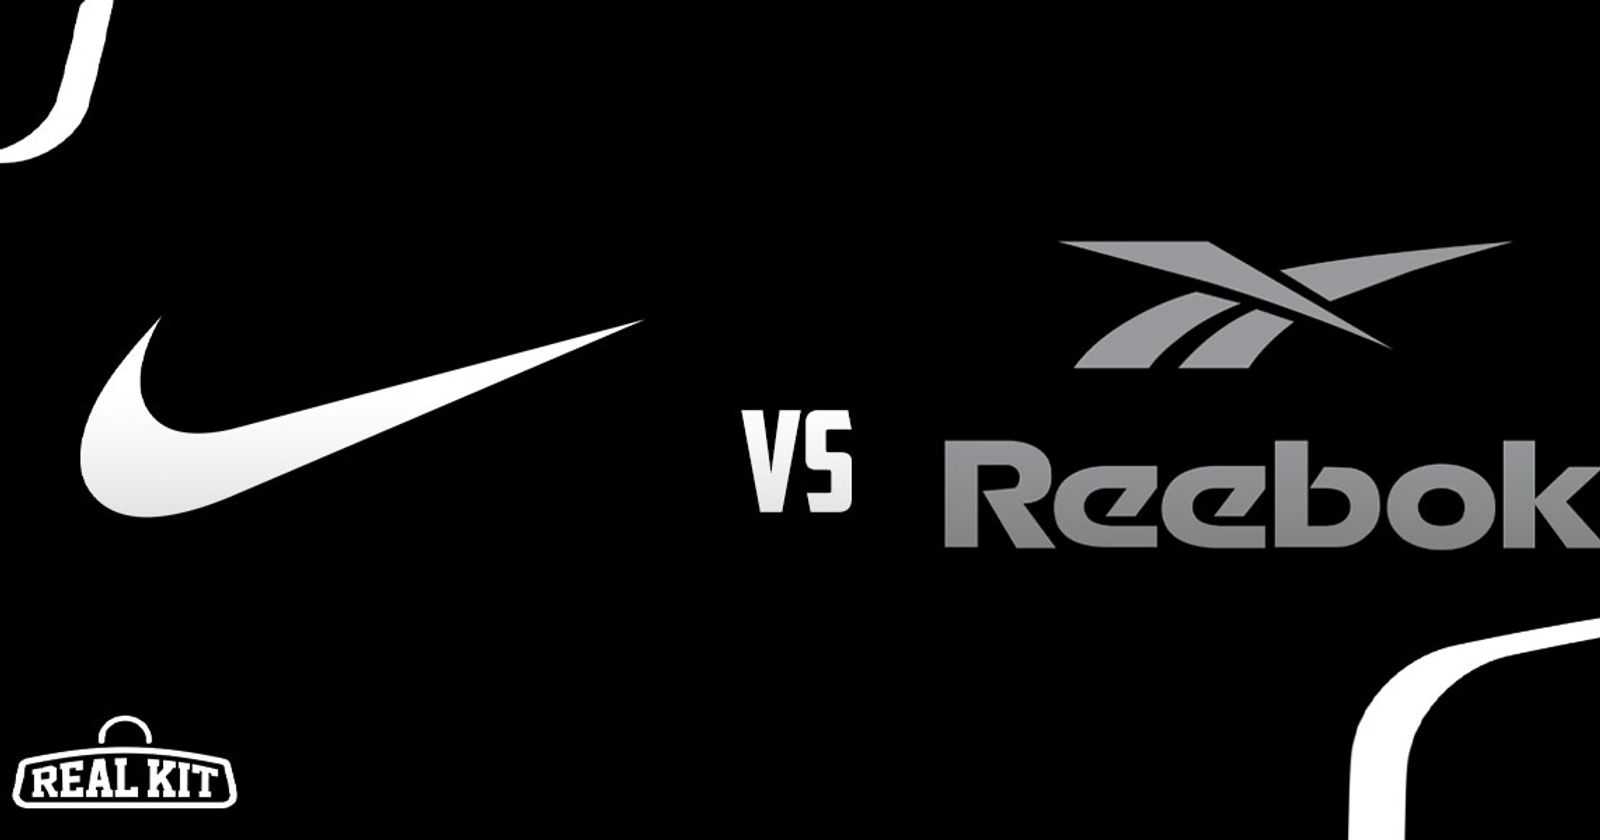 Nike vs Reebok sizing - do they compare?